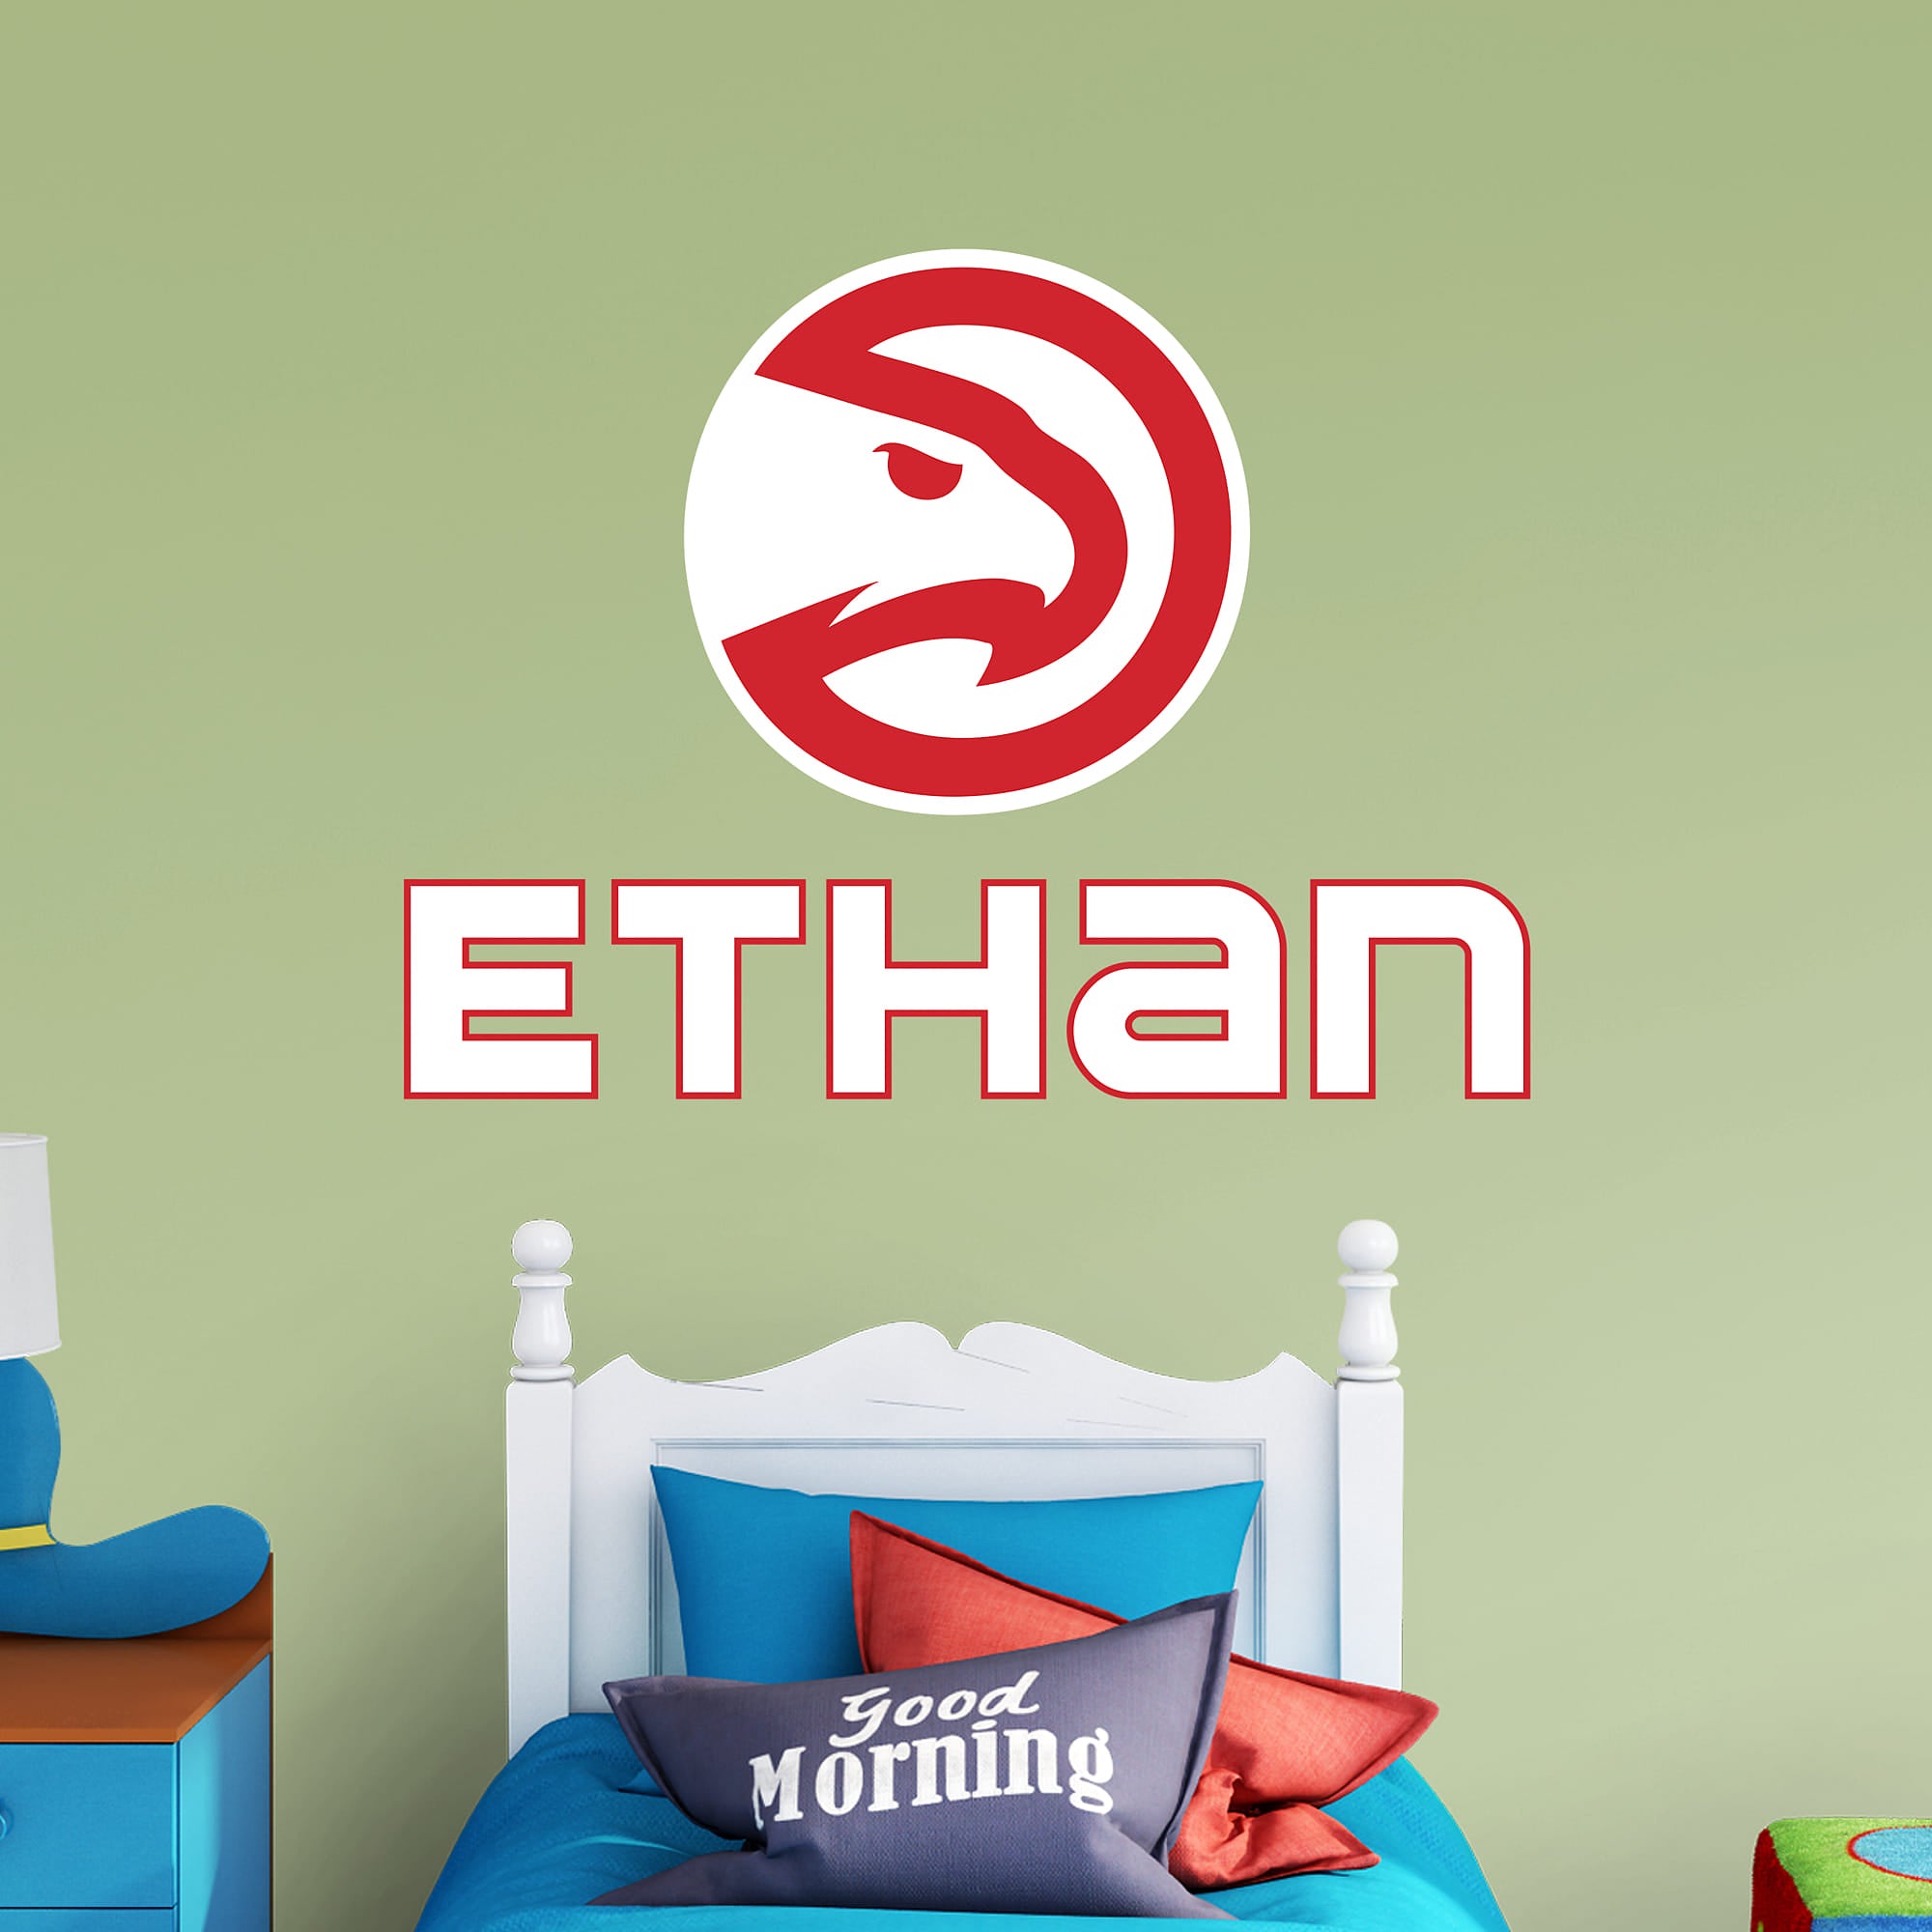 Atlanta Hawks: Stacked Personalized Name - Officially Licensed NBA Transfer Decal in White (52"W x 39.5"H) by Fathead | Vinyl